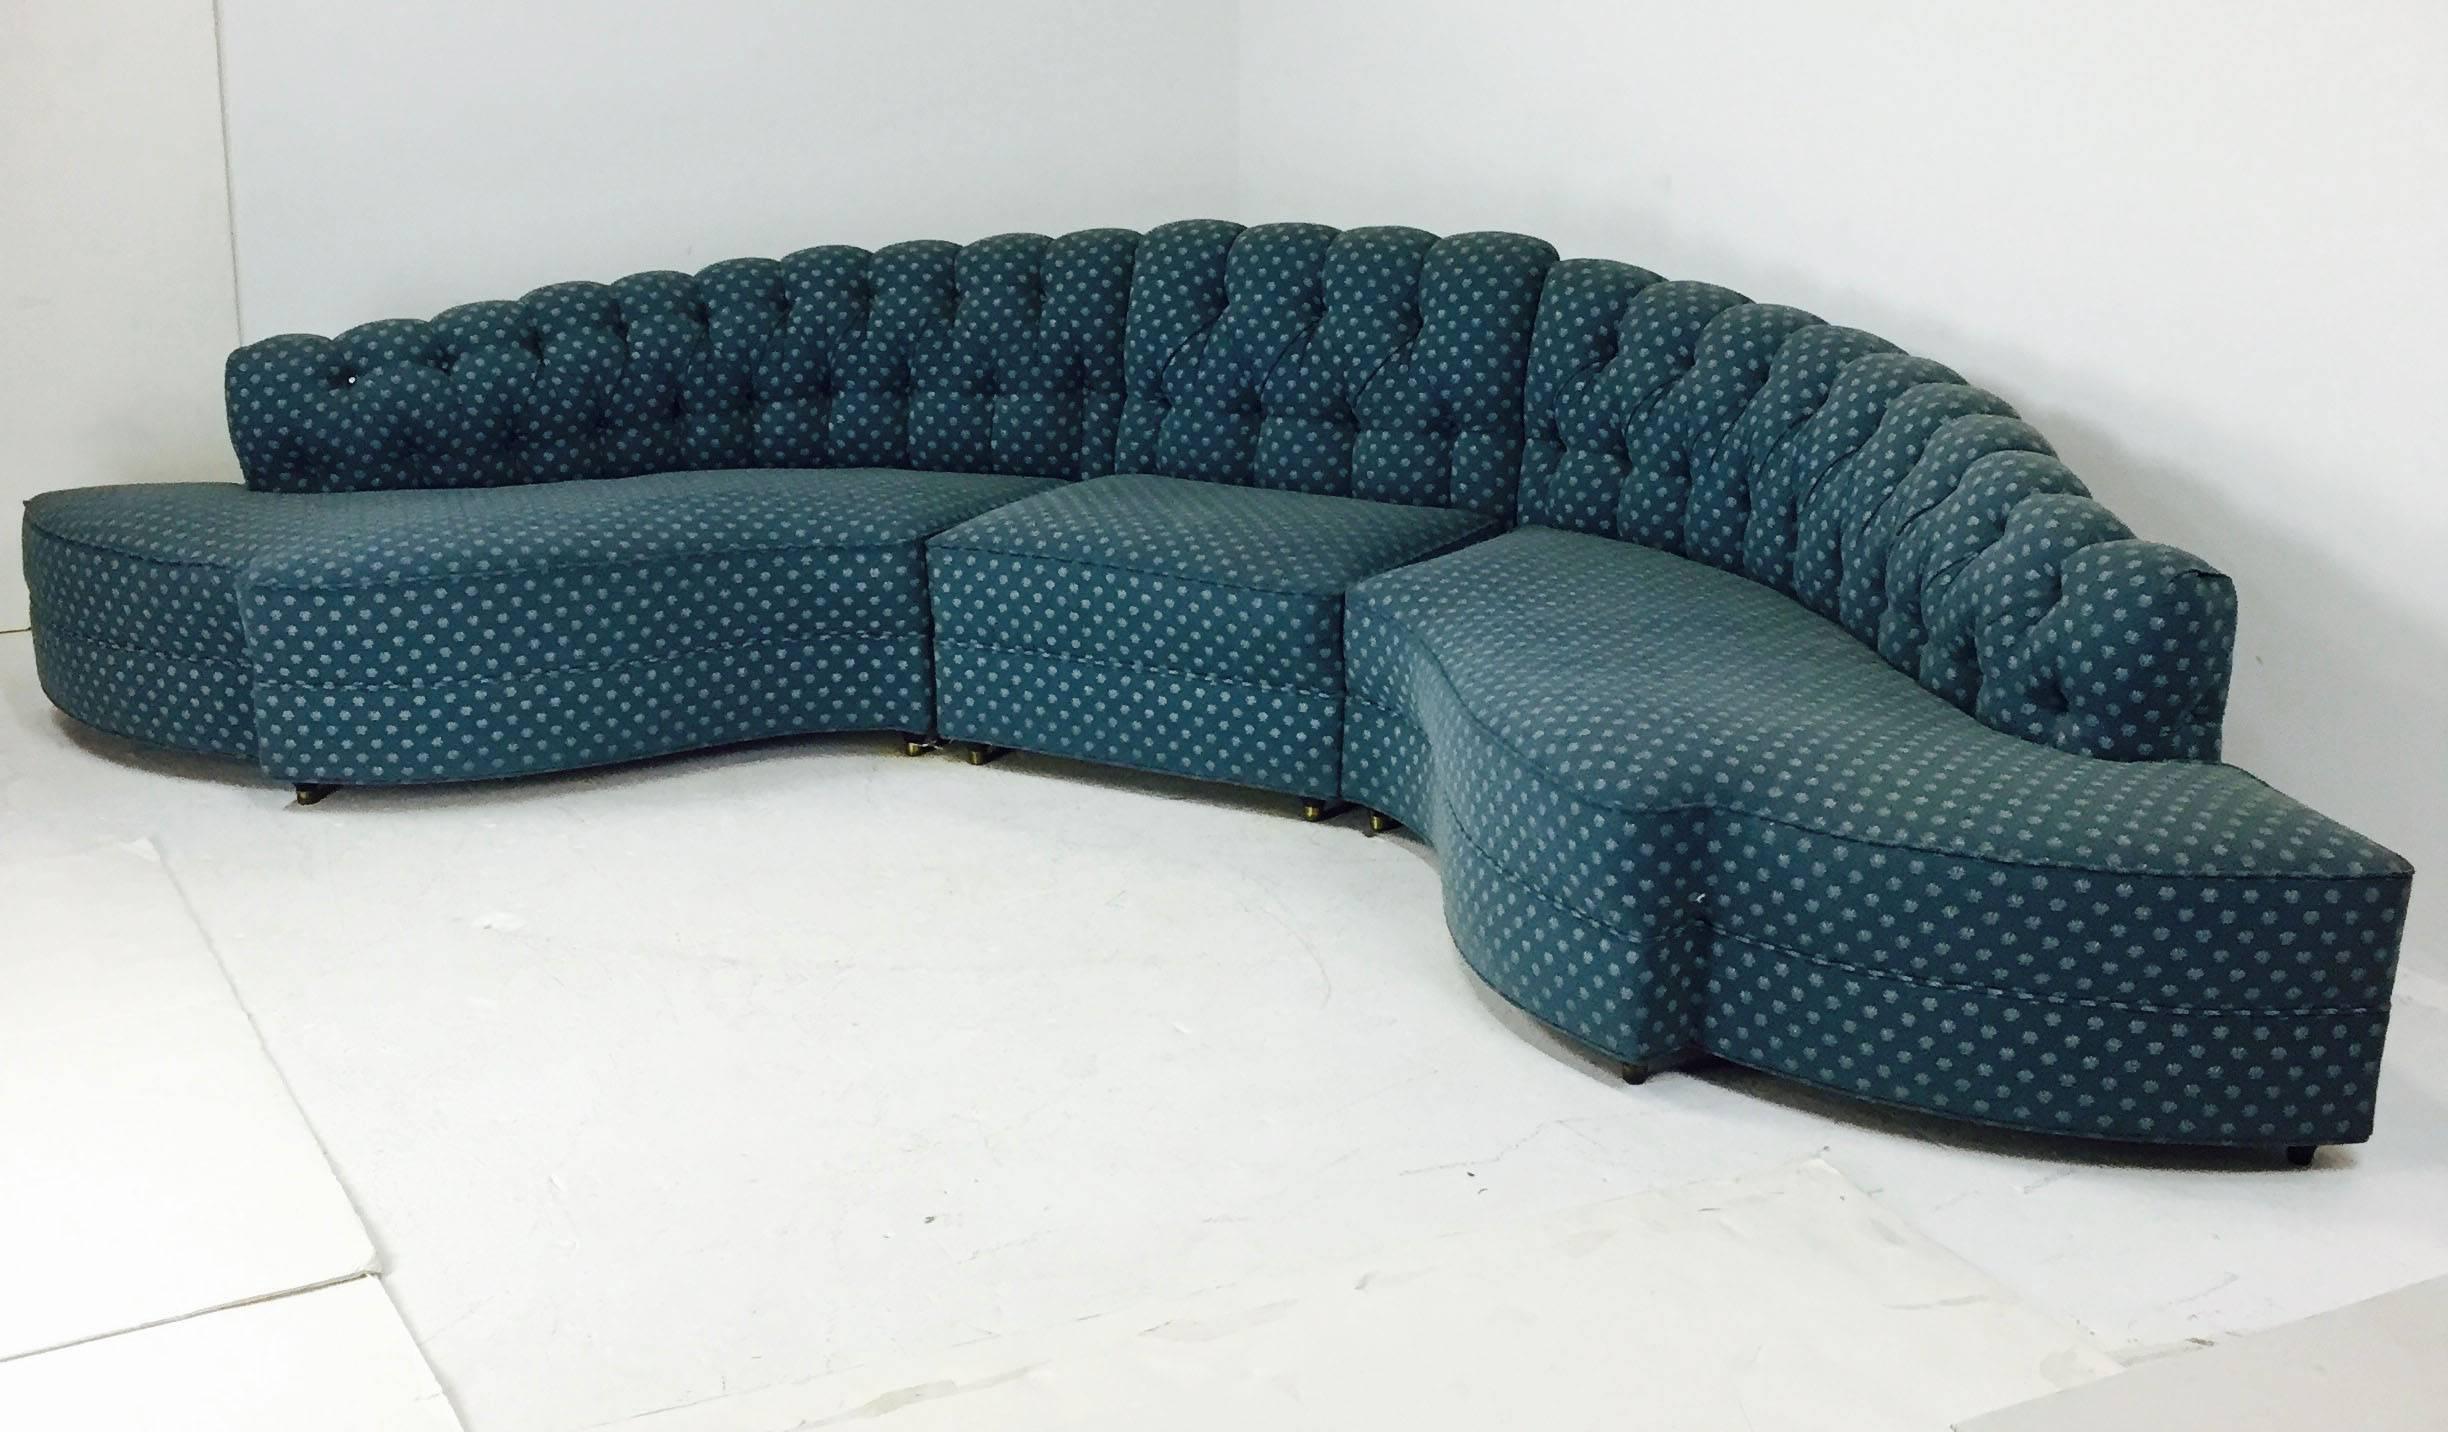 1930s three-piece sectional sofa. Upholstery is in good vintage condition, but new upholstery is recommended.

Dimensions: 144